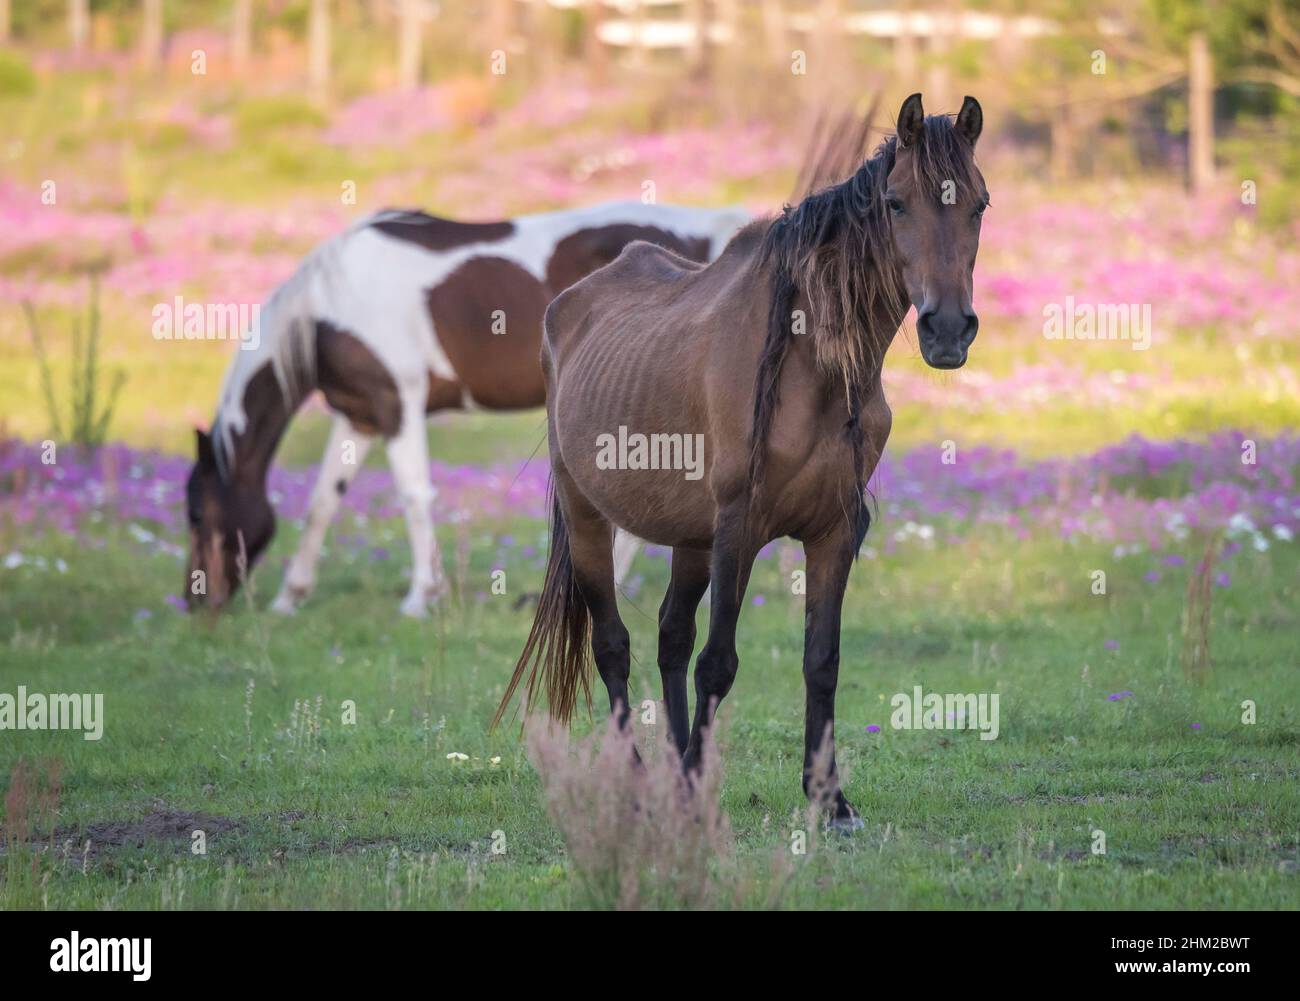 Anemic un-cared for horse with bones showing in wildflower field Stock Photo